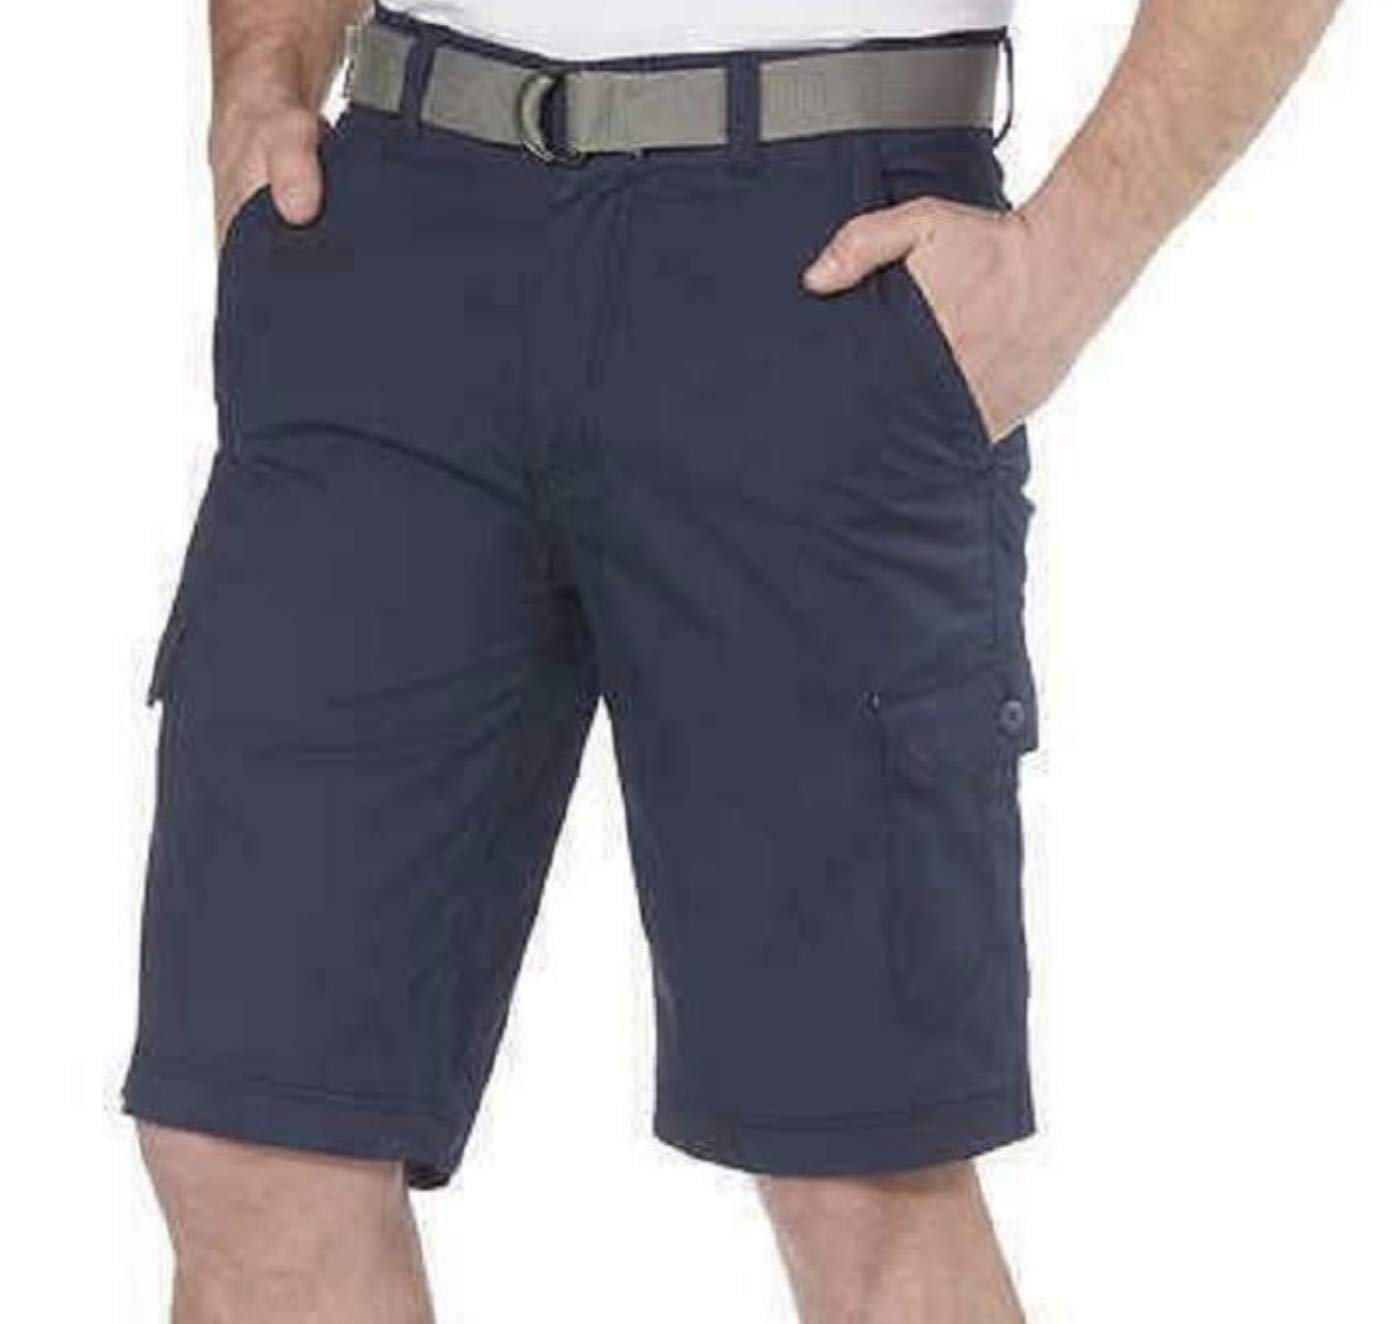 Wear First Stretch Belted Cargo Shorts - Blue Nights - Navy (32)